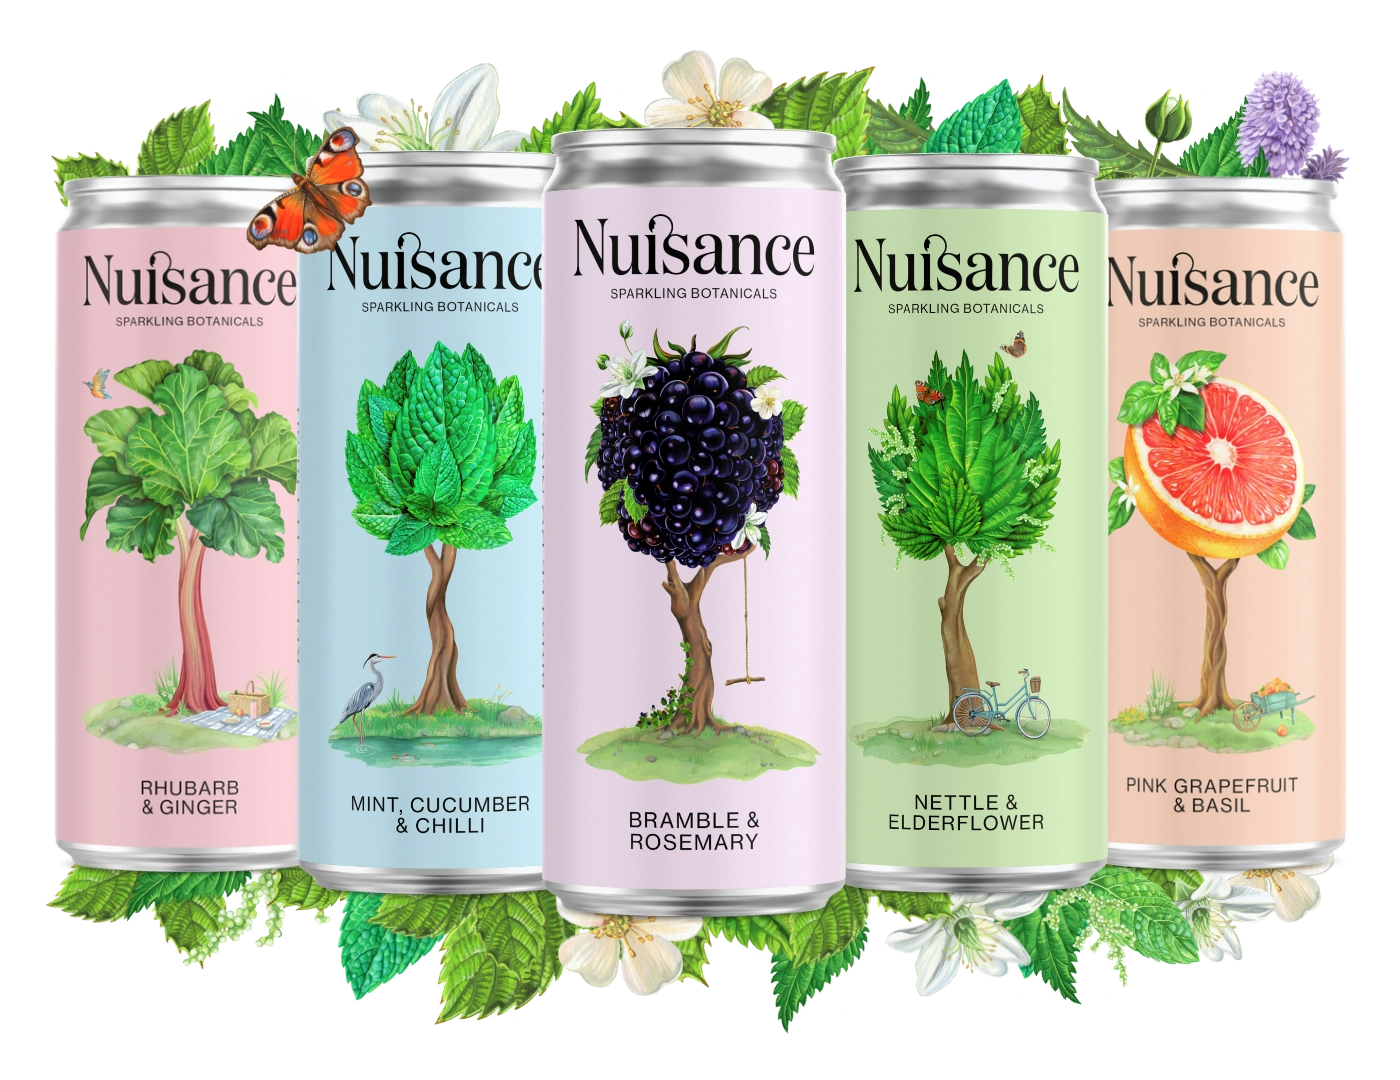 The Nuisance range of low calorie, sparkling botanical soft drinks